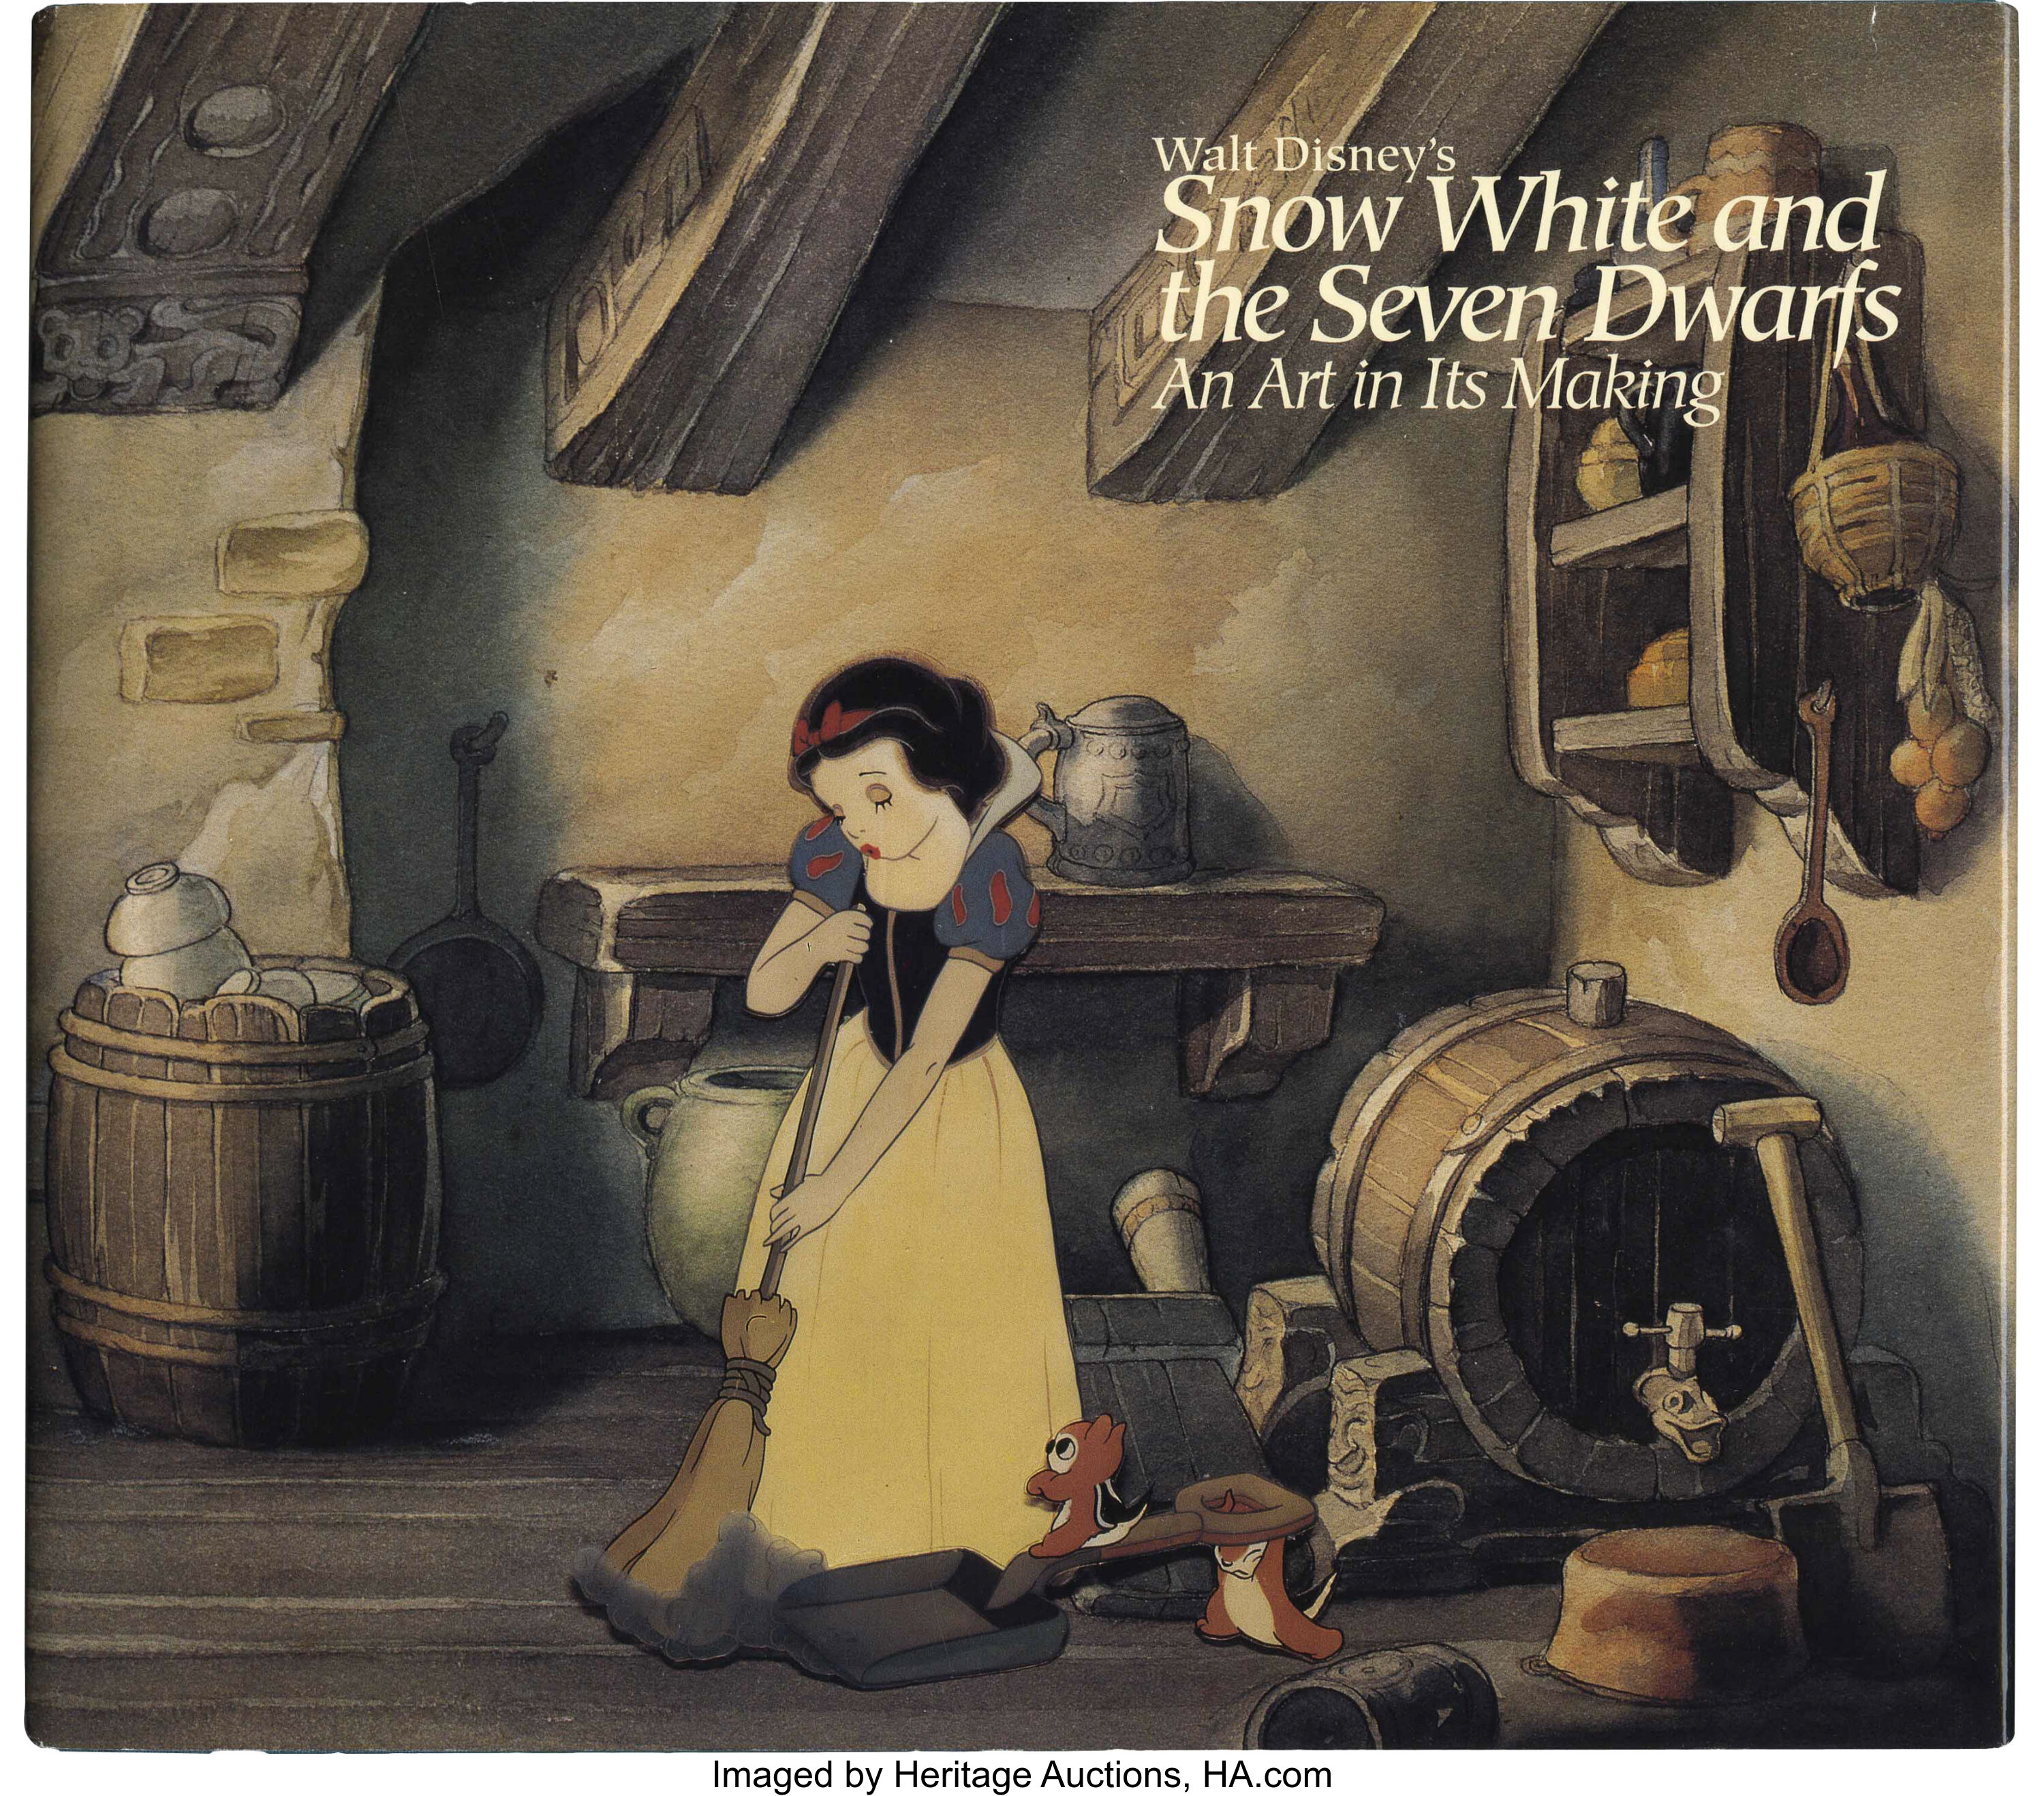 Walt Disney's Snow White and the Seven Dwarfs 1994 1st Edition Hardcover  Book